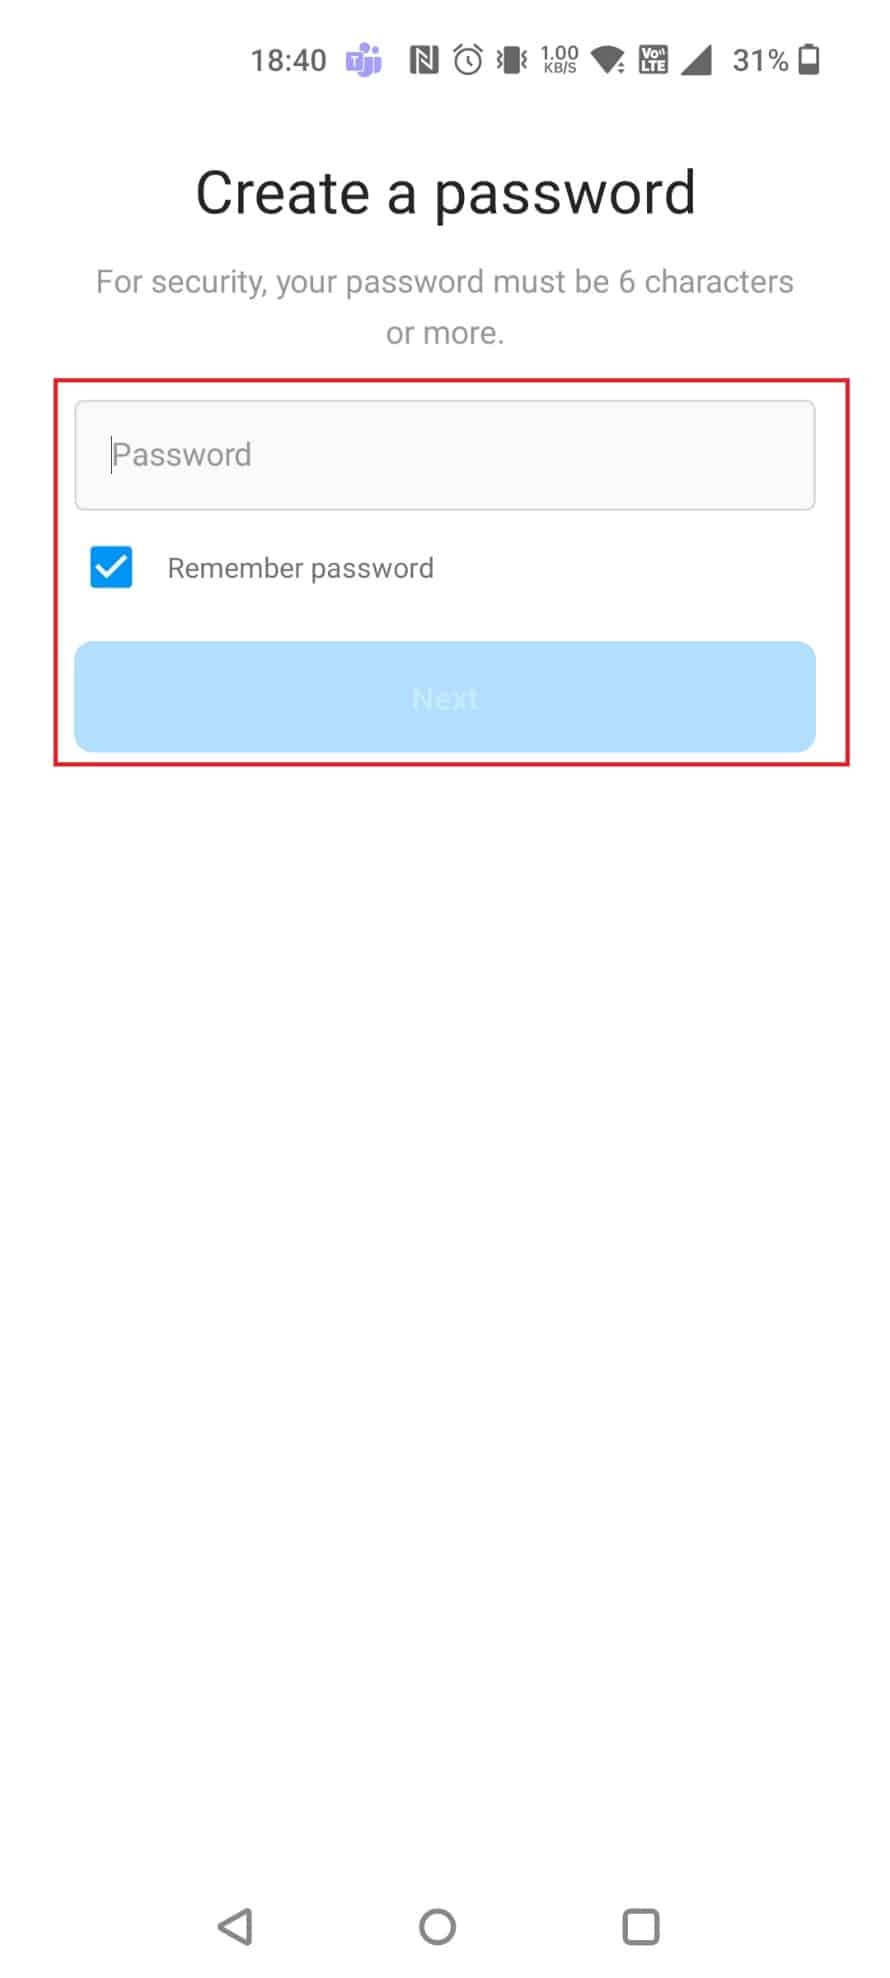 Set a password and tap on Next